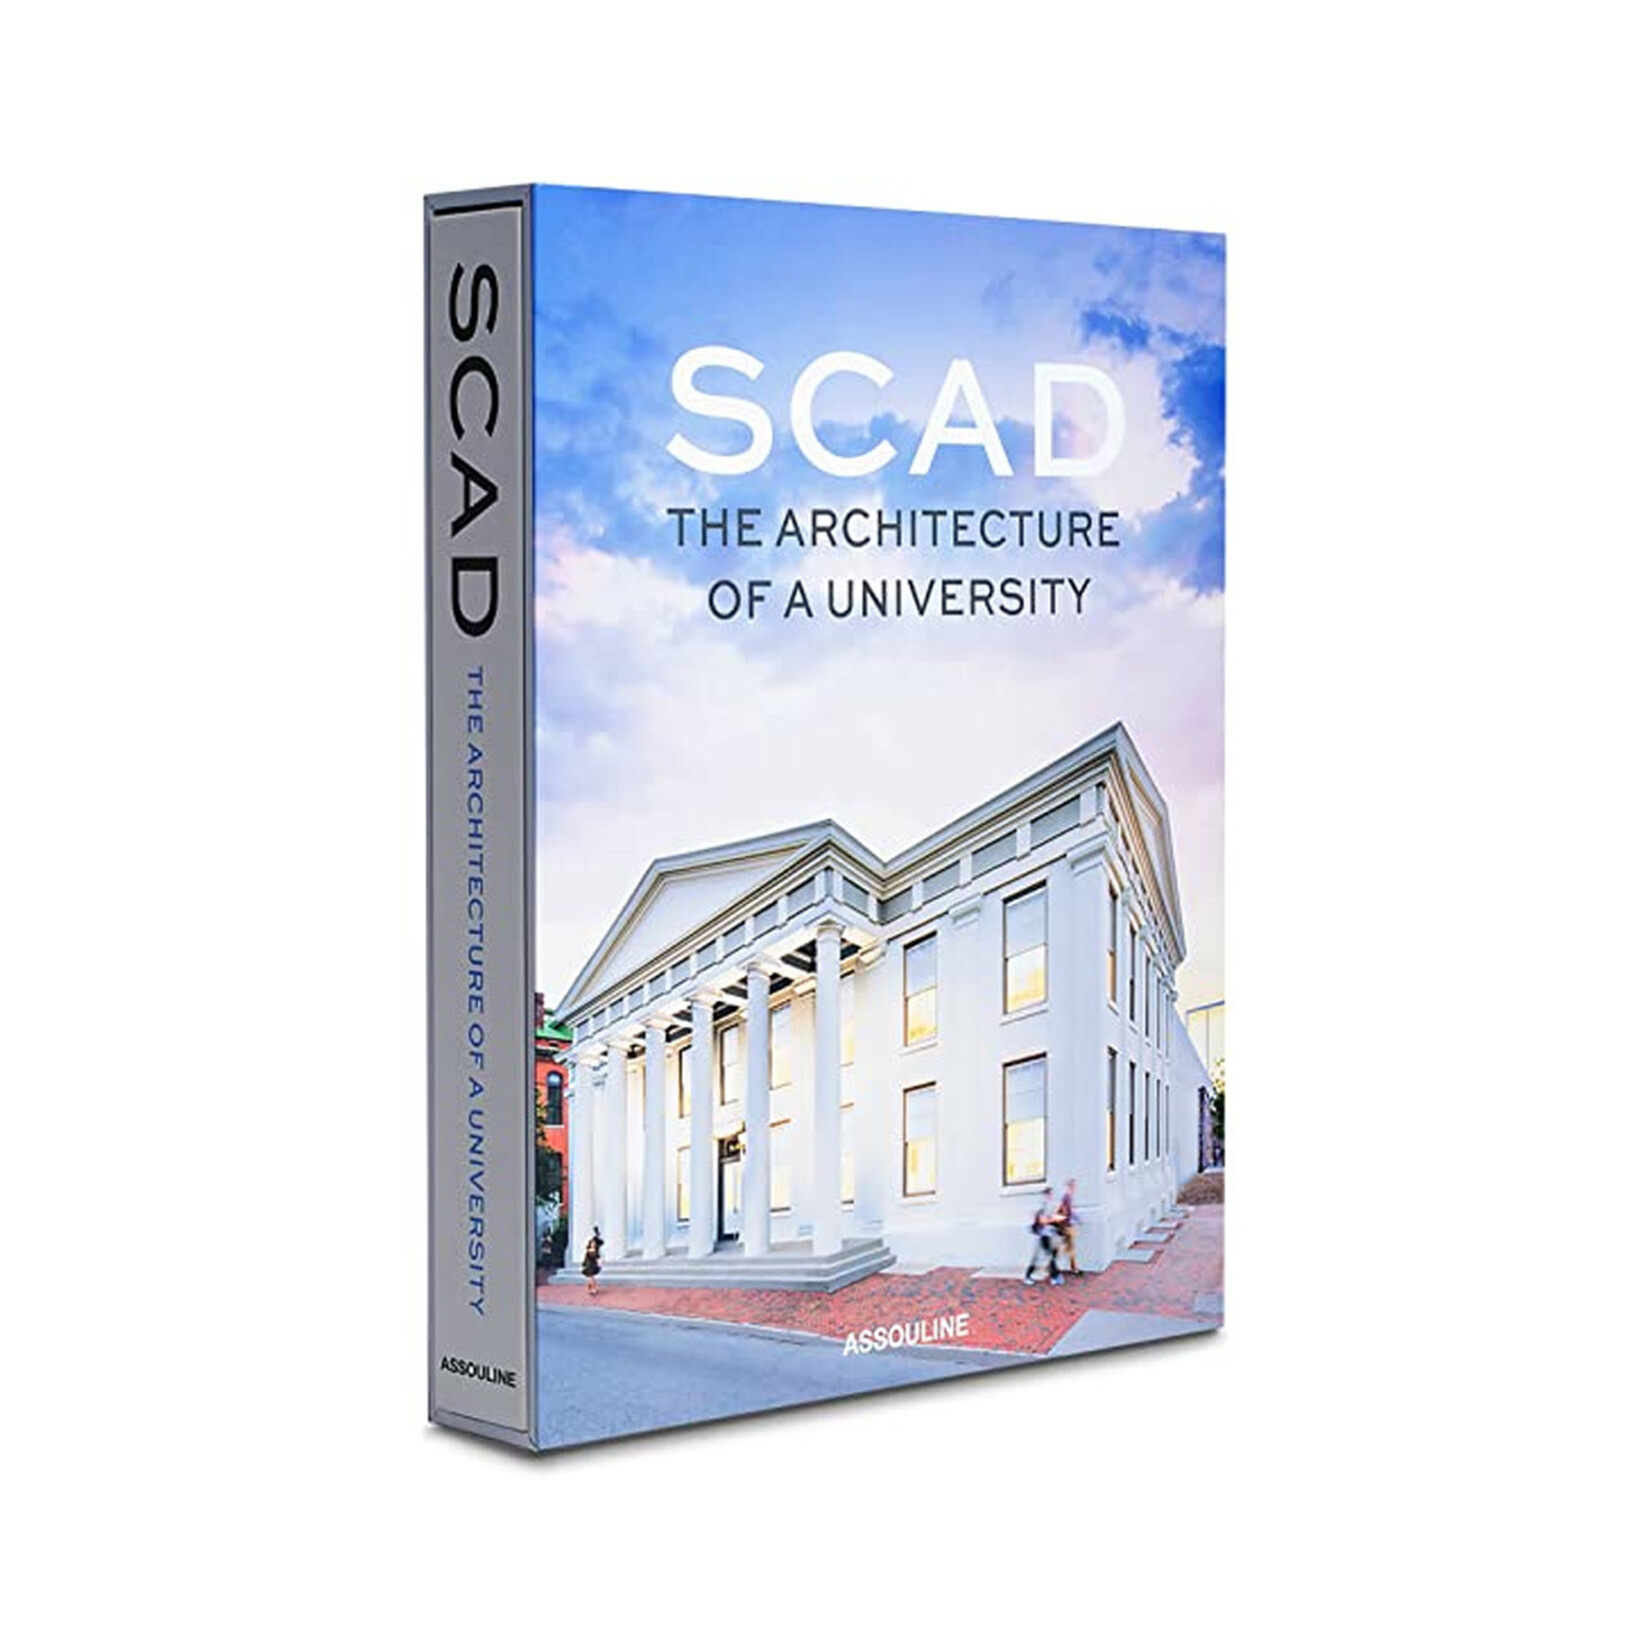 SCAD, The Architecture of a University